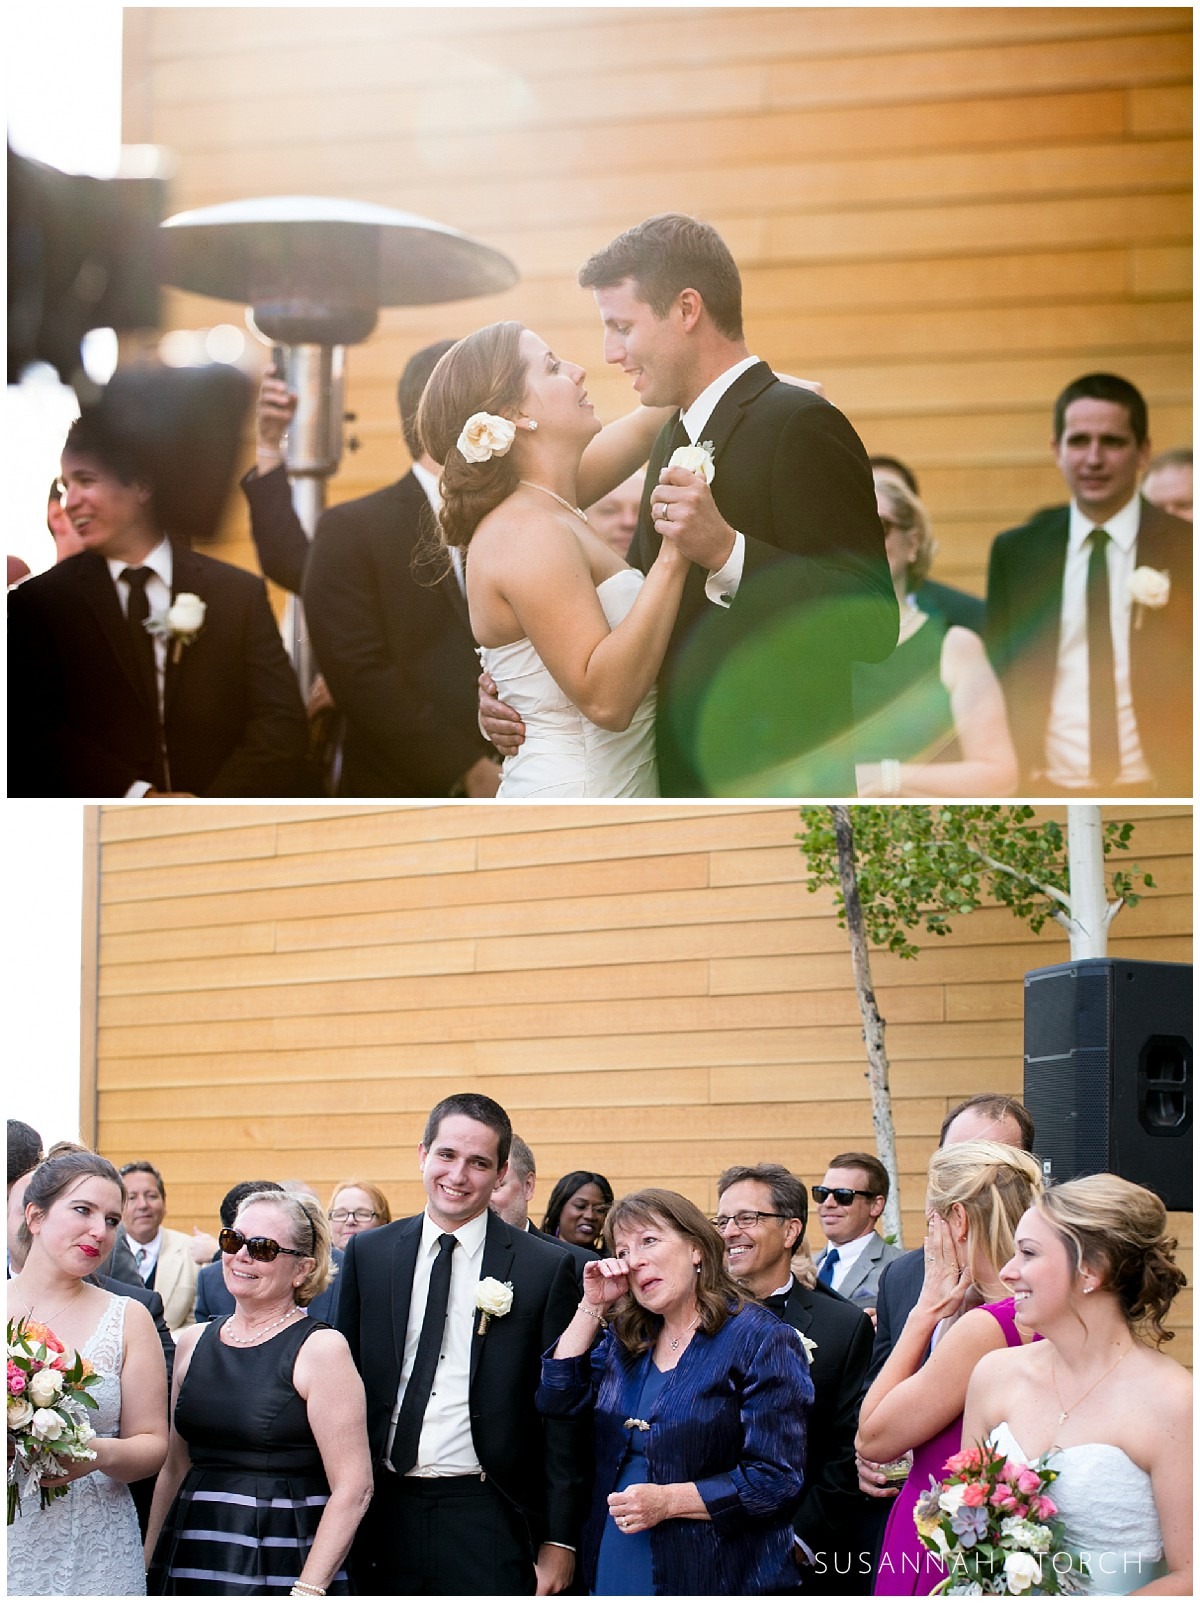 a bride and groom dance and a wedding guest wipes tears from her eyes